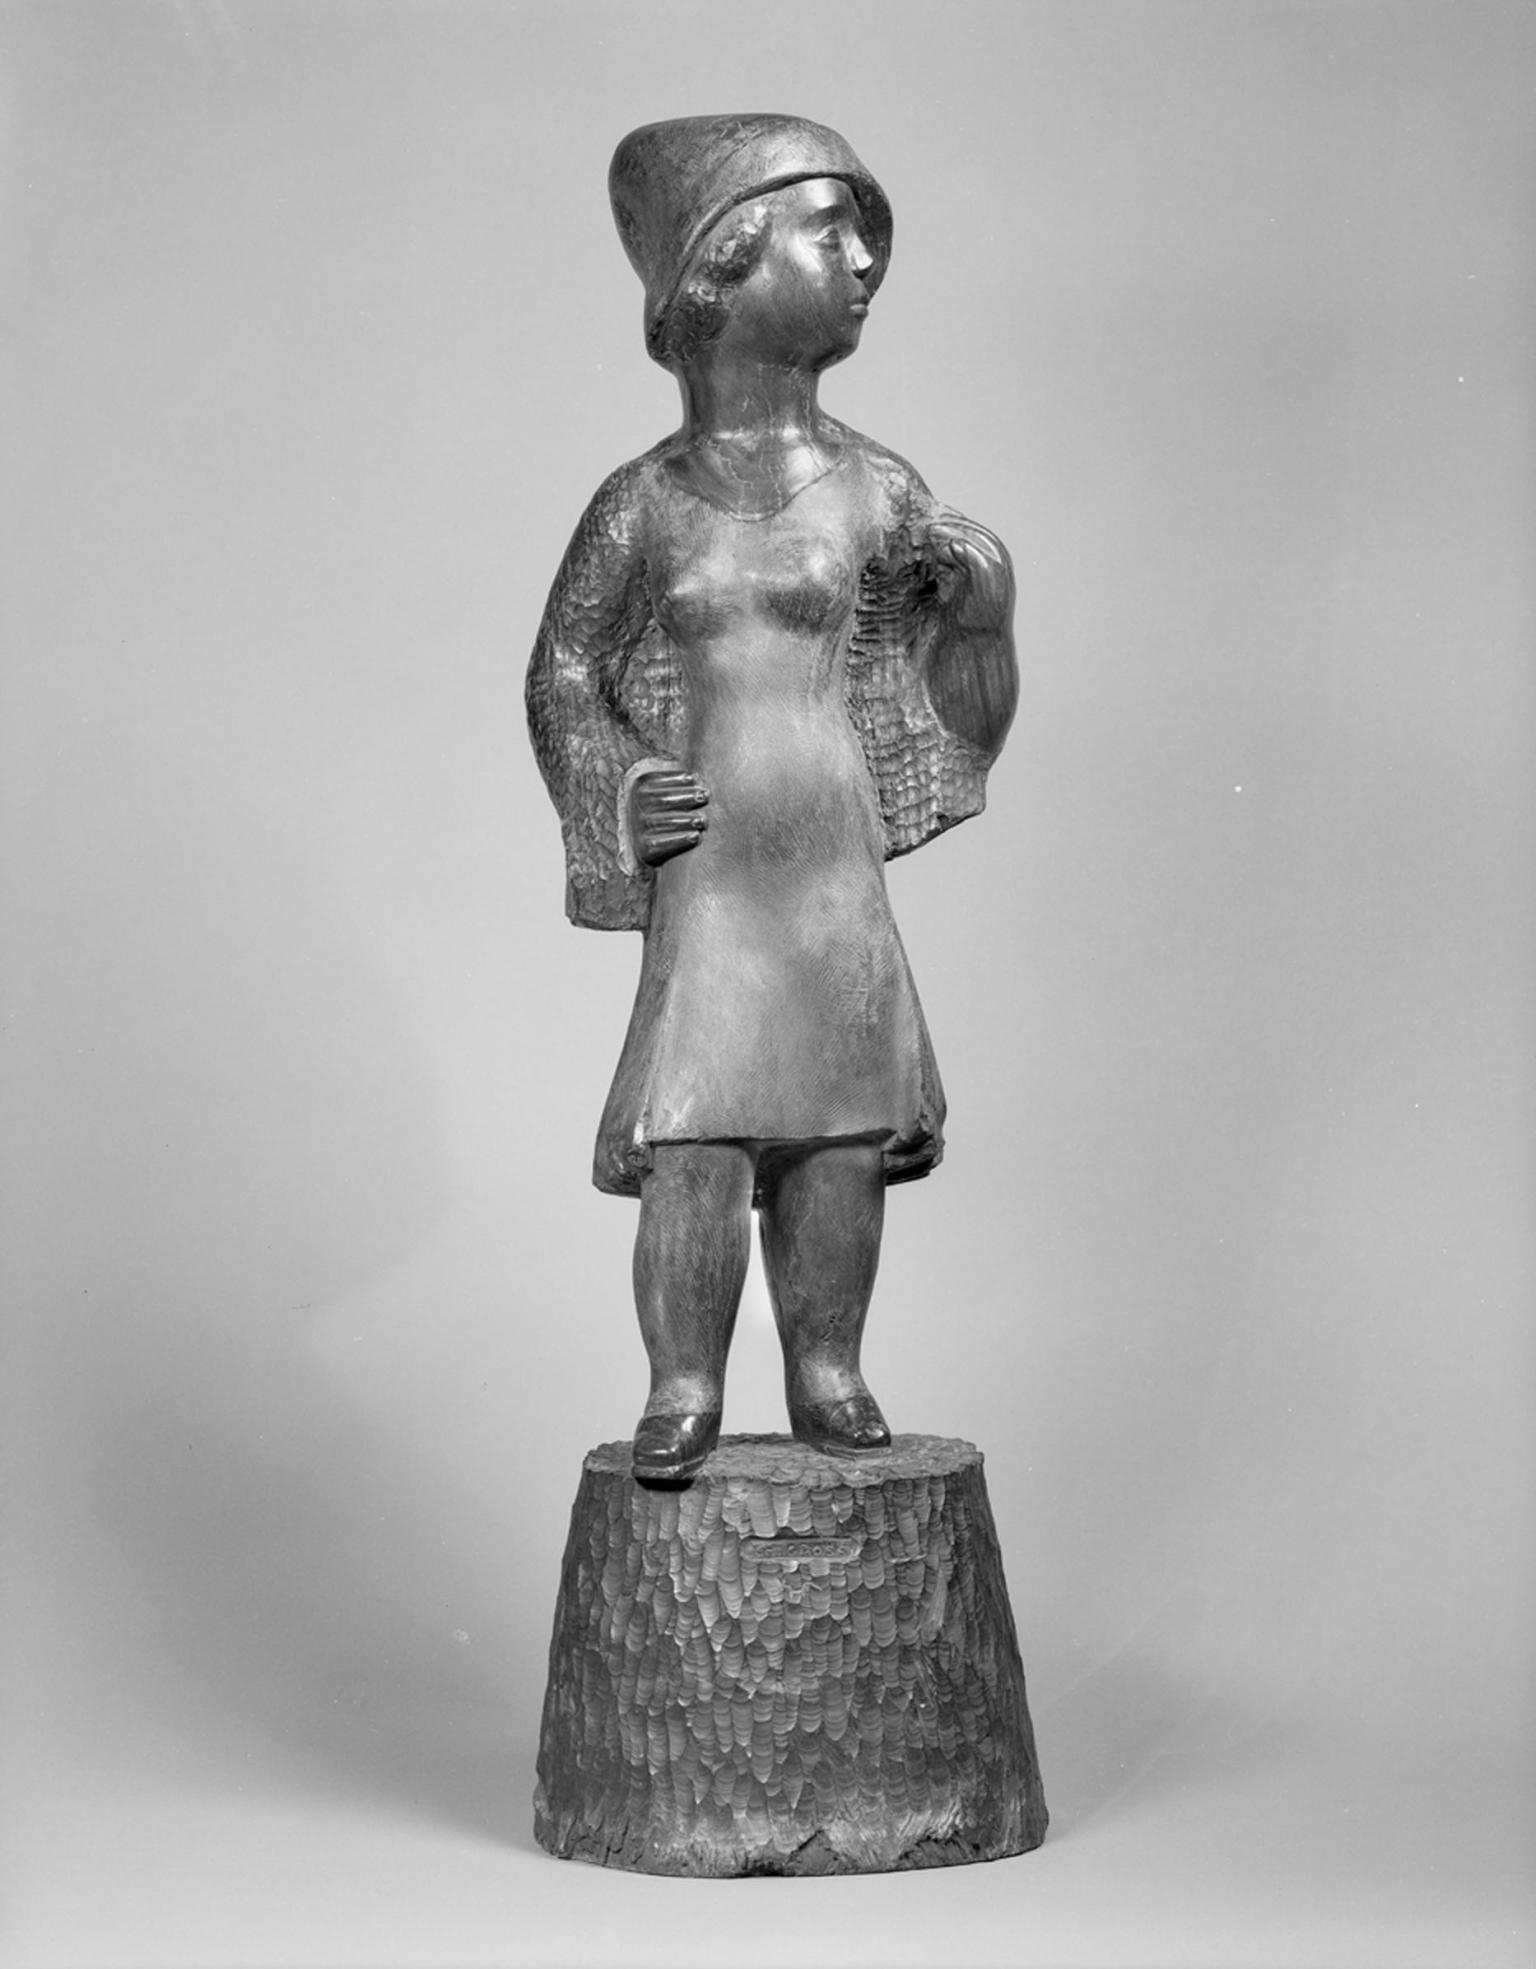 Sculpture of woman wearing dress and hat looking to her left.